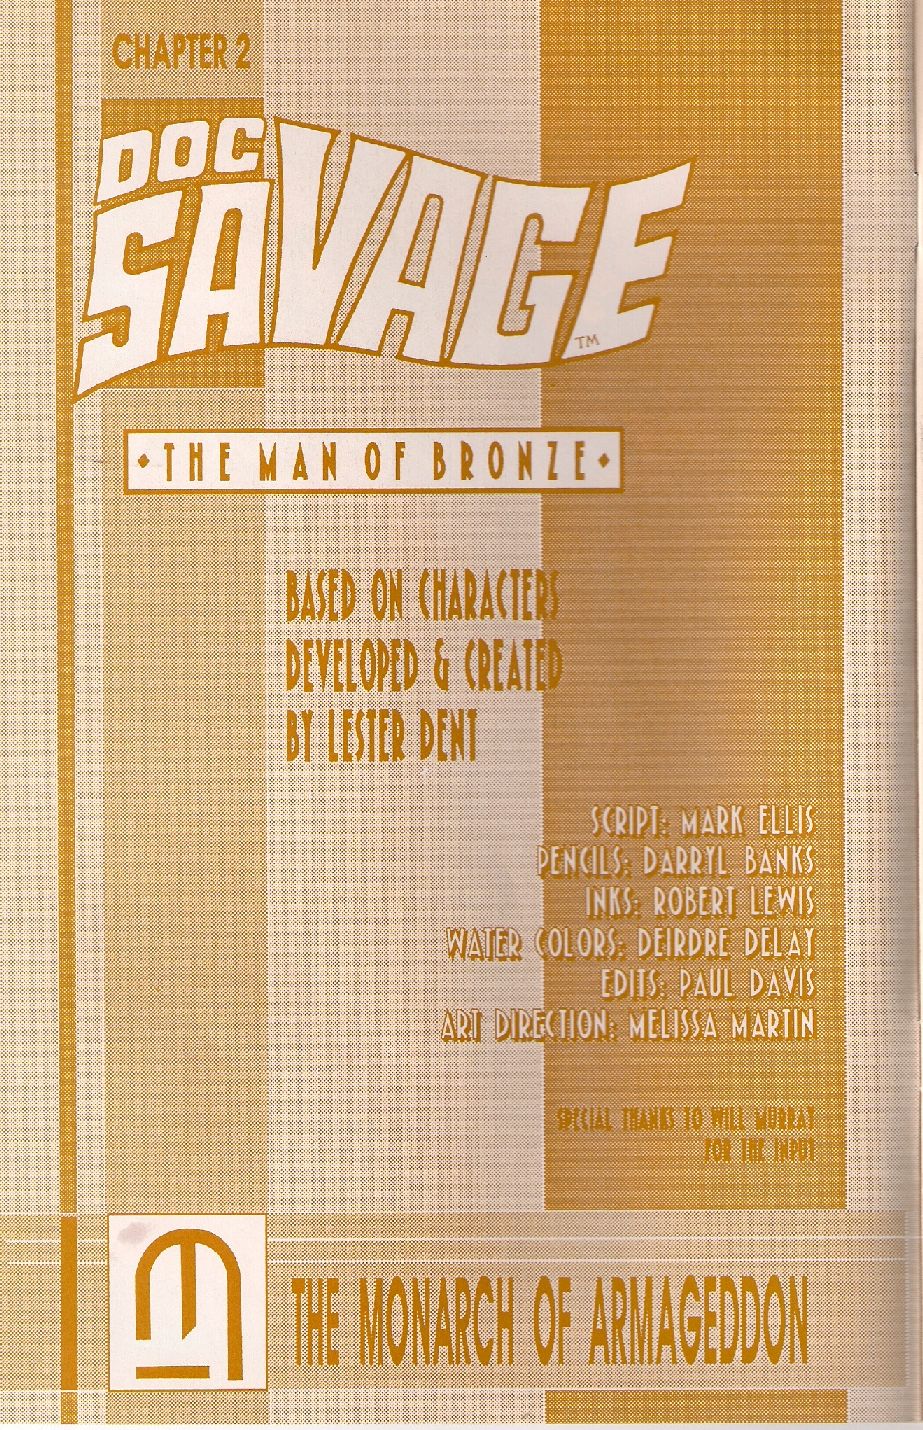 Read online Doc Savage: The Man of Bronze comic -  Issue #2 - 2